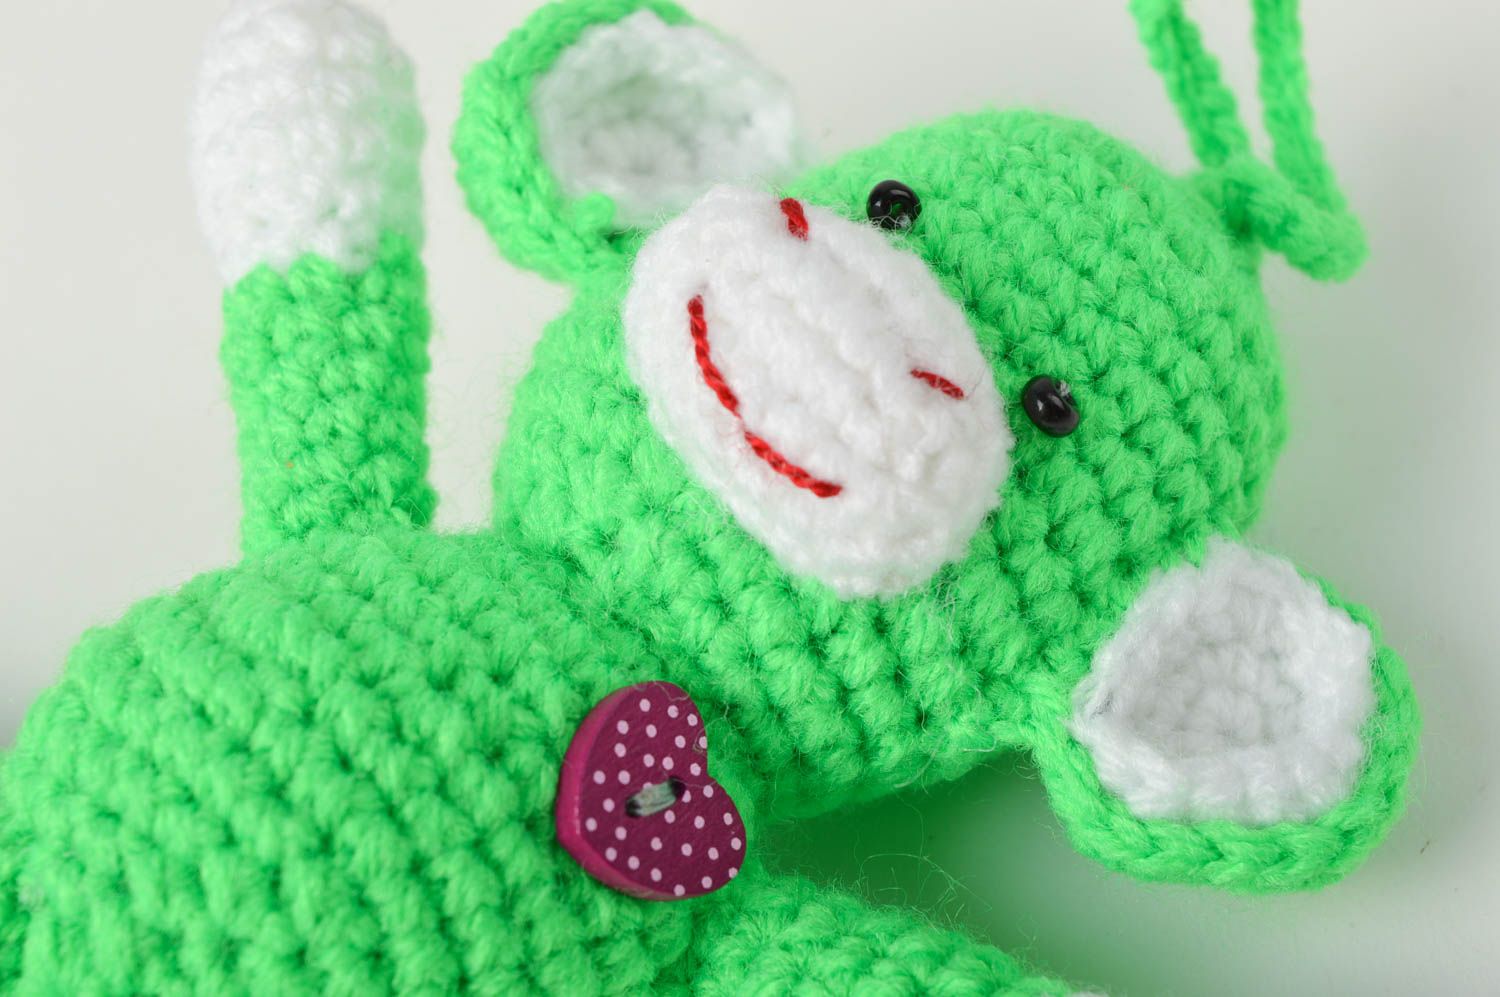 Handmade cute crocheted toy interior decor hand-crocheted toy for children photo 4